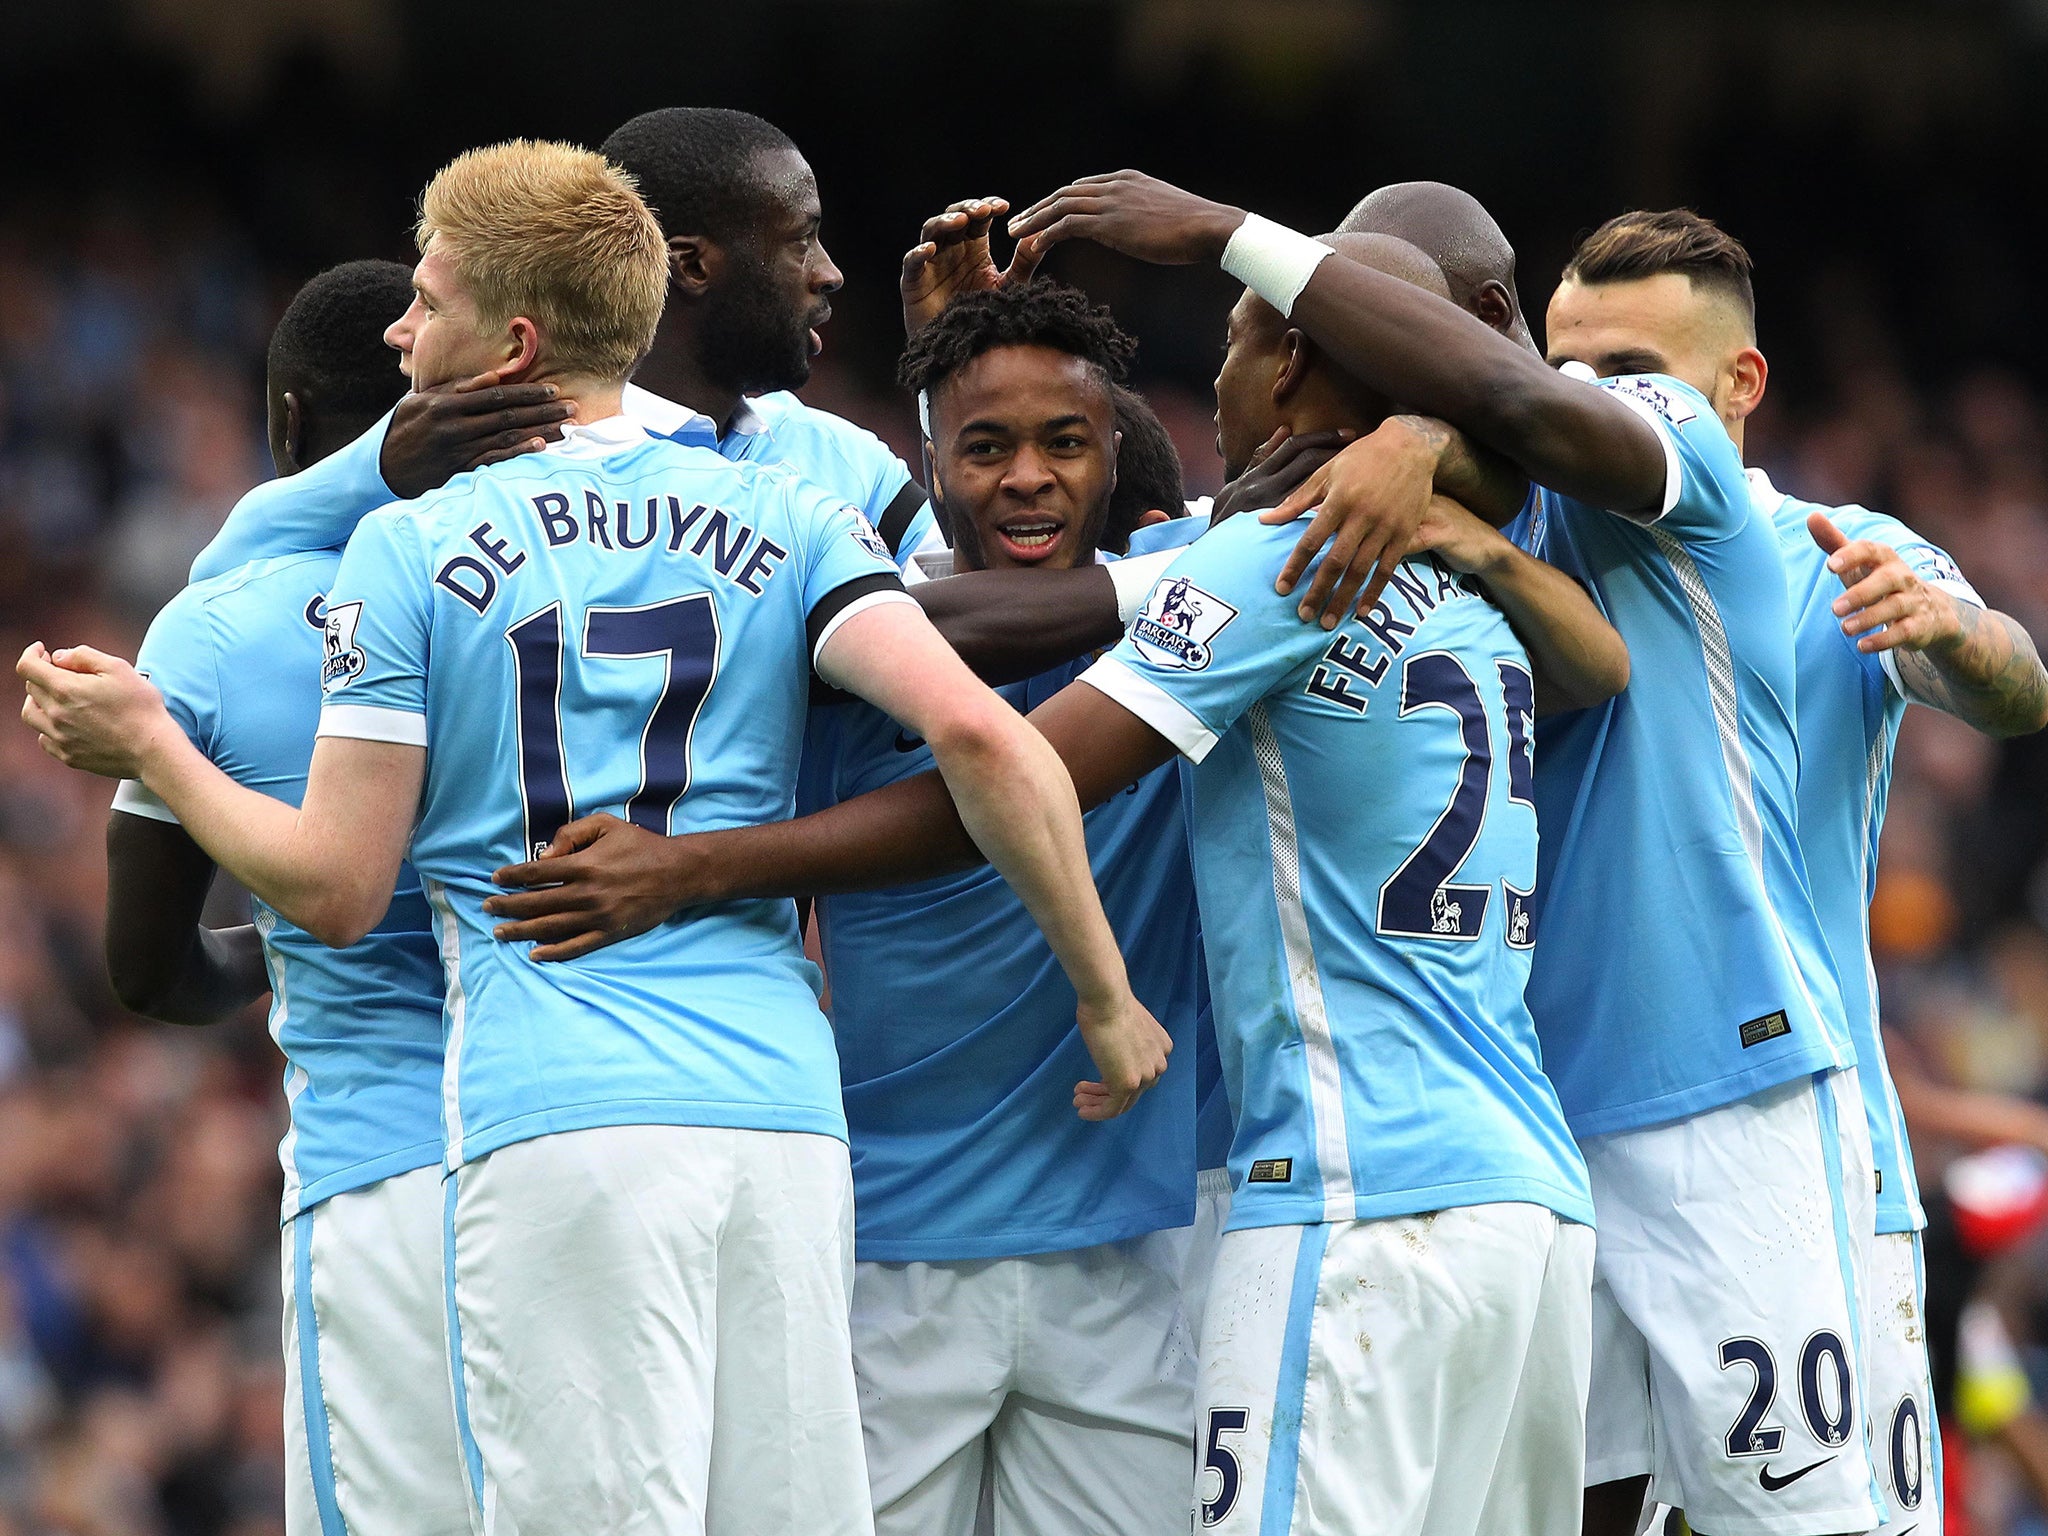 Manchester City congratulate Raheem Sterling for scoring against Bournemouth